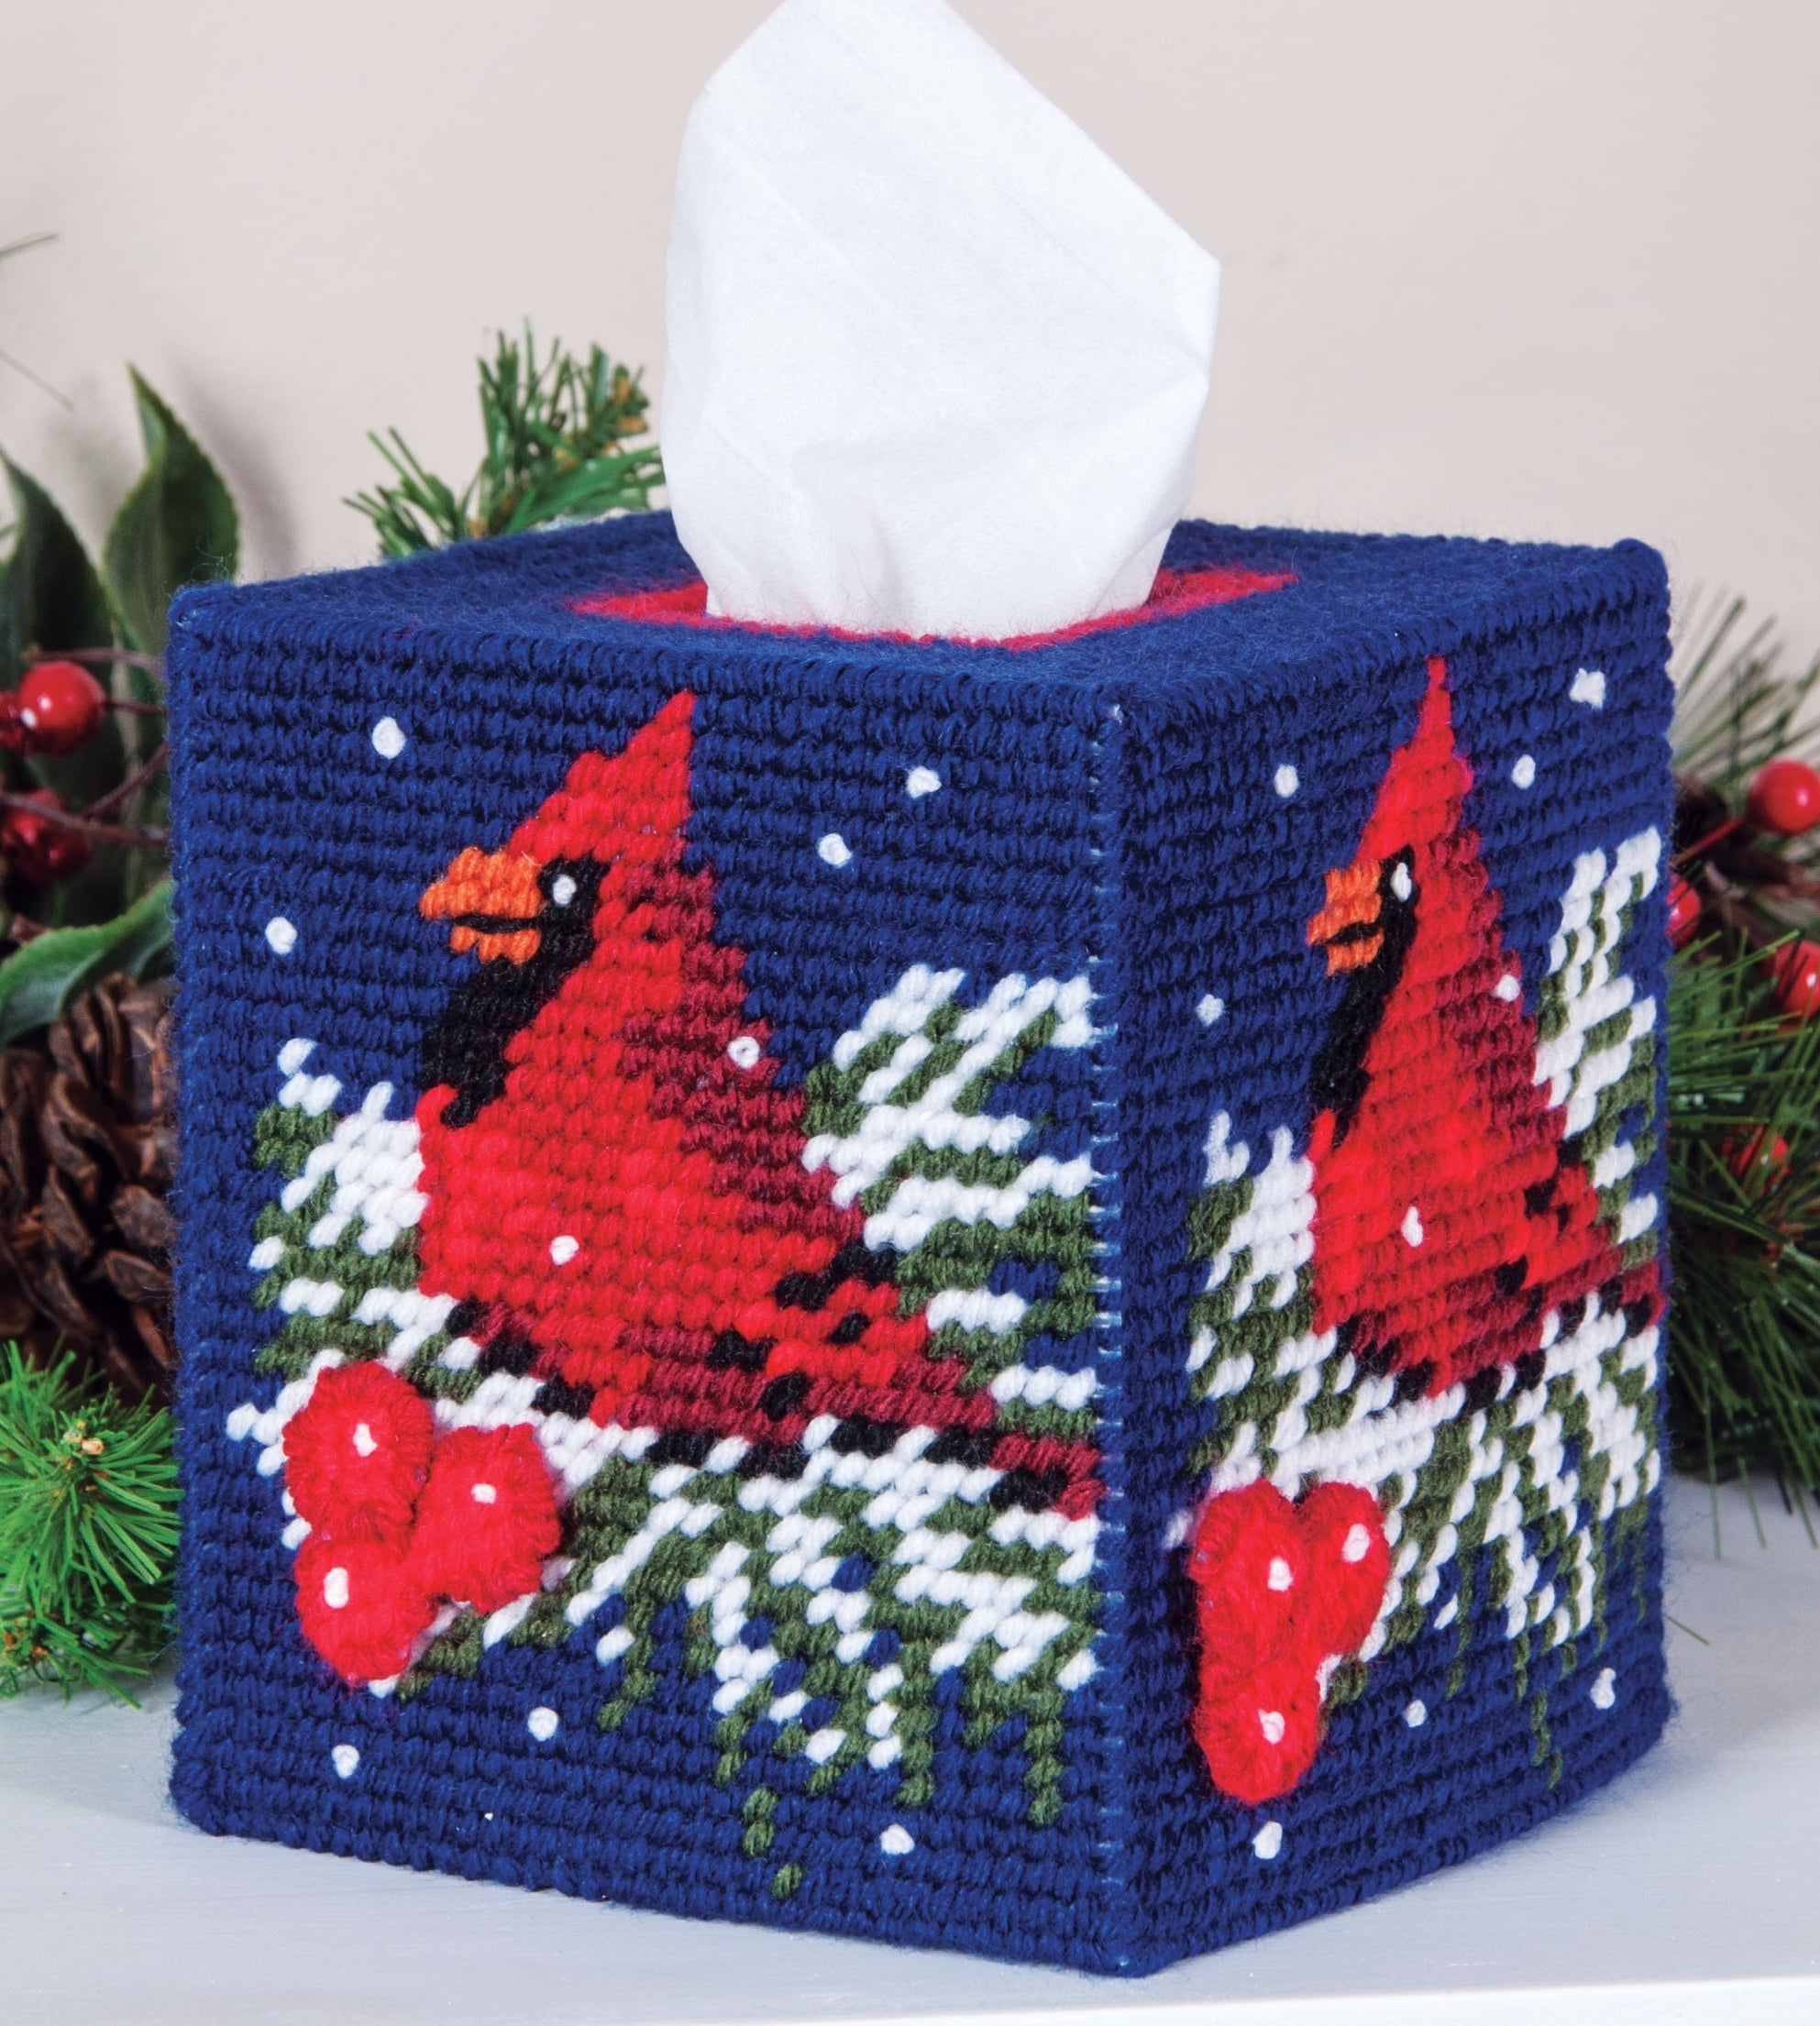 Cardinals Plastic Canvas Counted Cross Stitch Ornament Kit – Mary